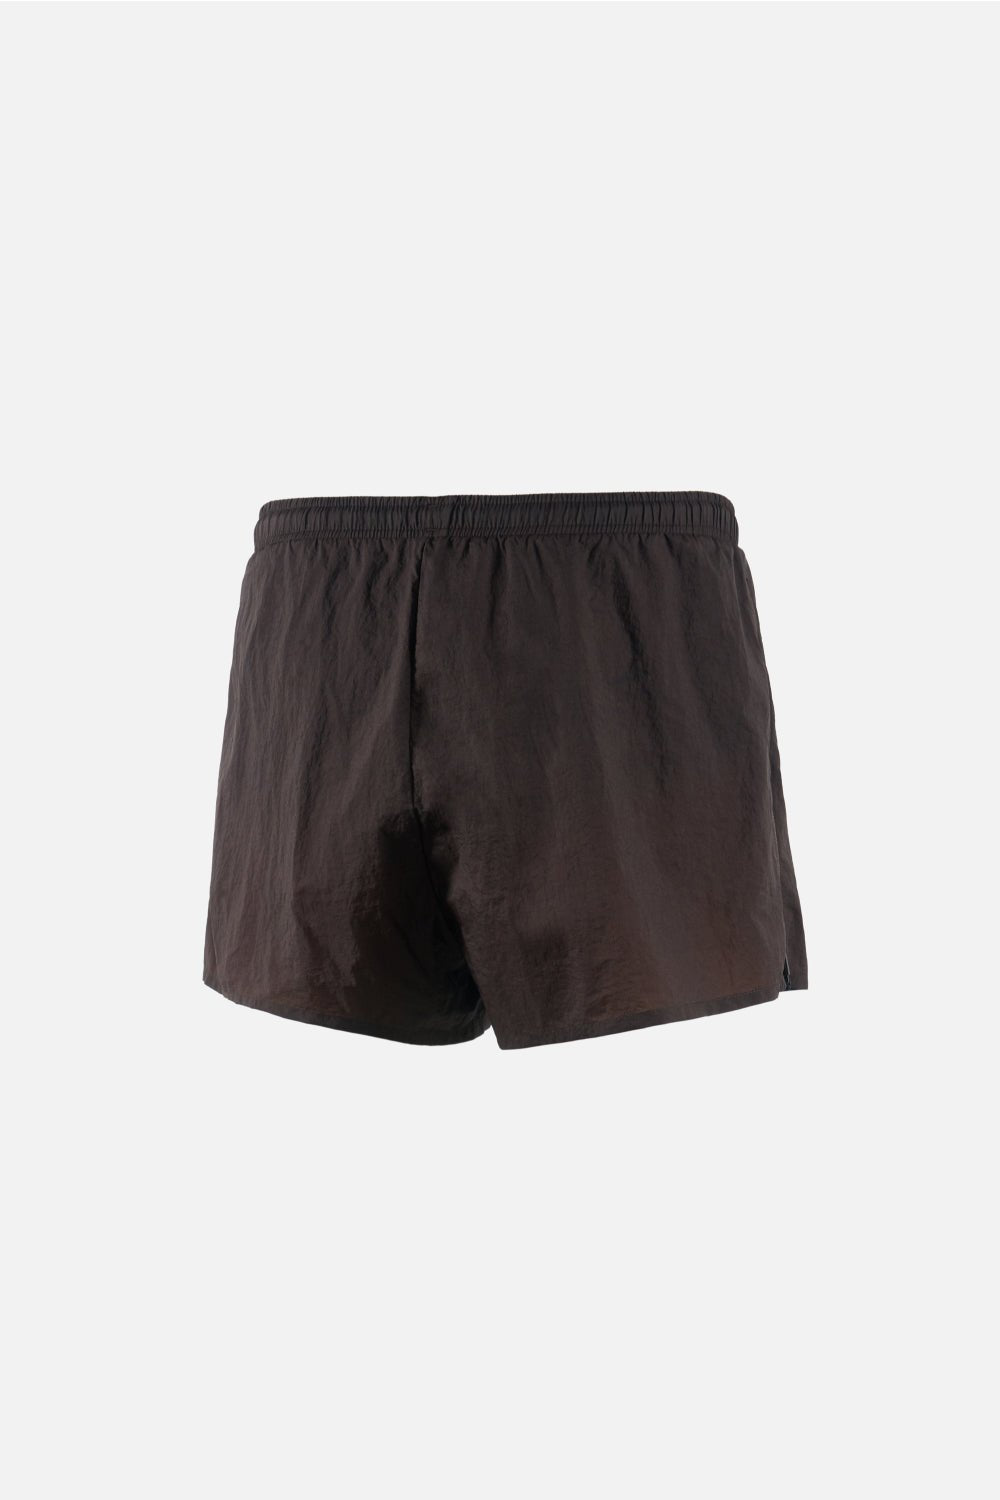 District Vision Ultralight Zippered Hiking Shorts - Cacao | Coffee Outdoors